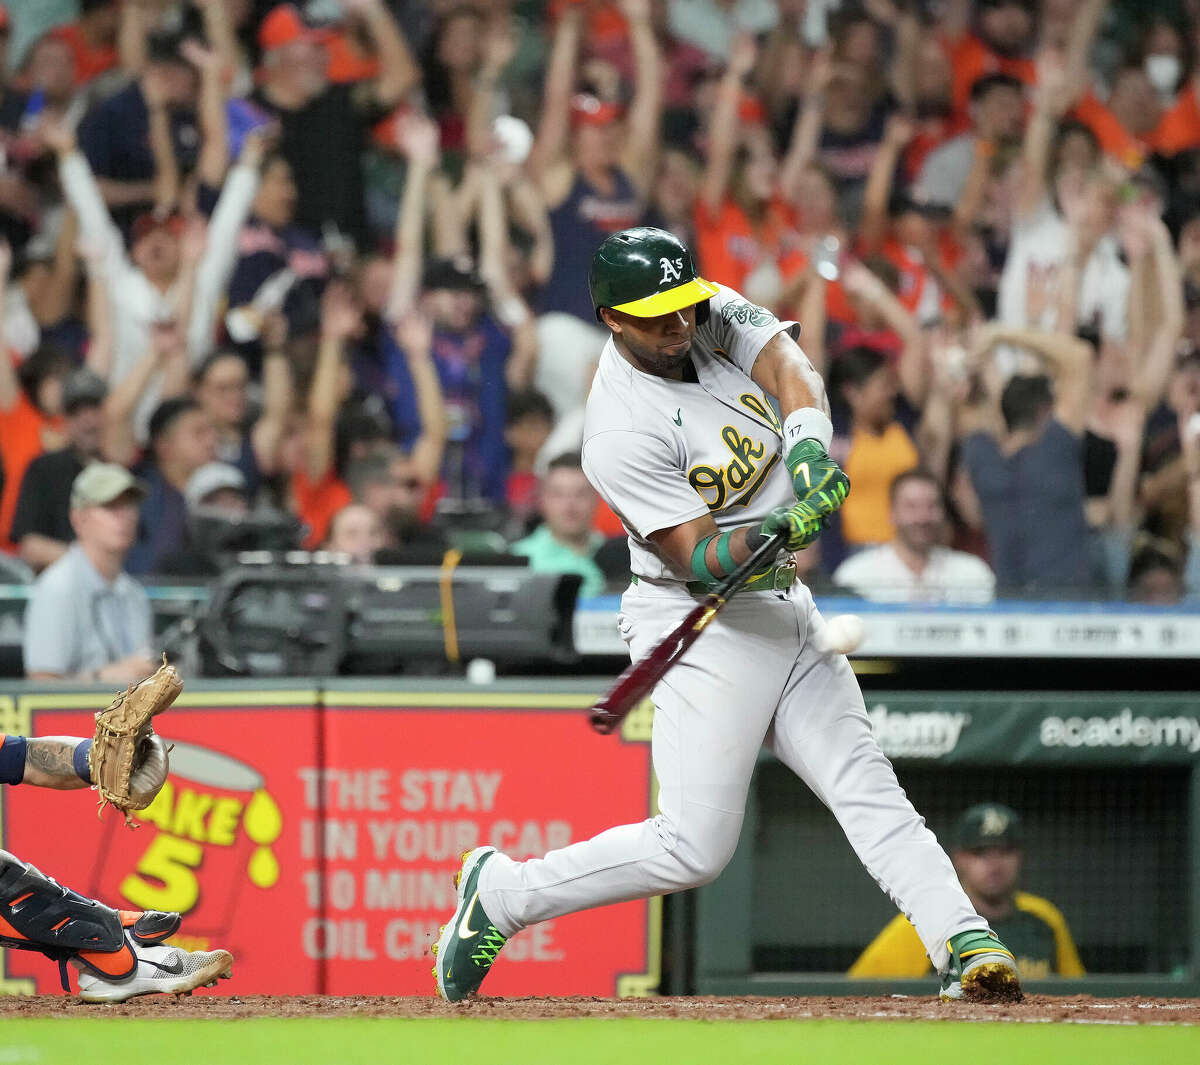 Oakland Athletics Elvis Andrus (17) drives in two runs off of Houston Astros starting pitcher Jose Urquidy (65) during the seventh inning of a MLB baseball game at Minute Maid Park on Friday, July 15, 2022 in Houston.